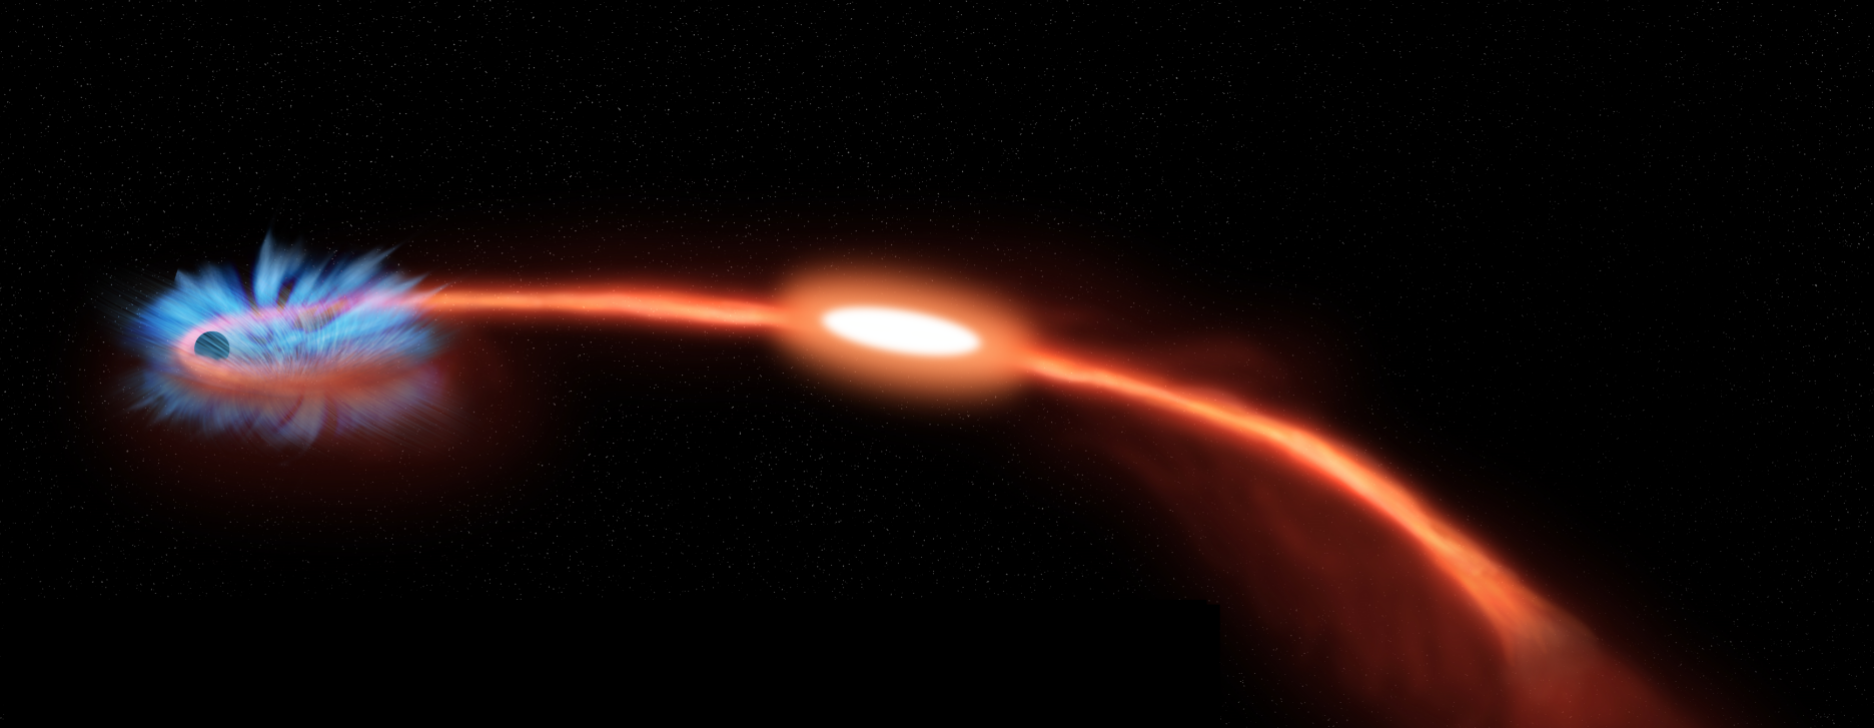 Black hole gruesomely rips apart star in another galaxy - Staring Up